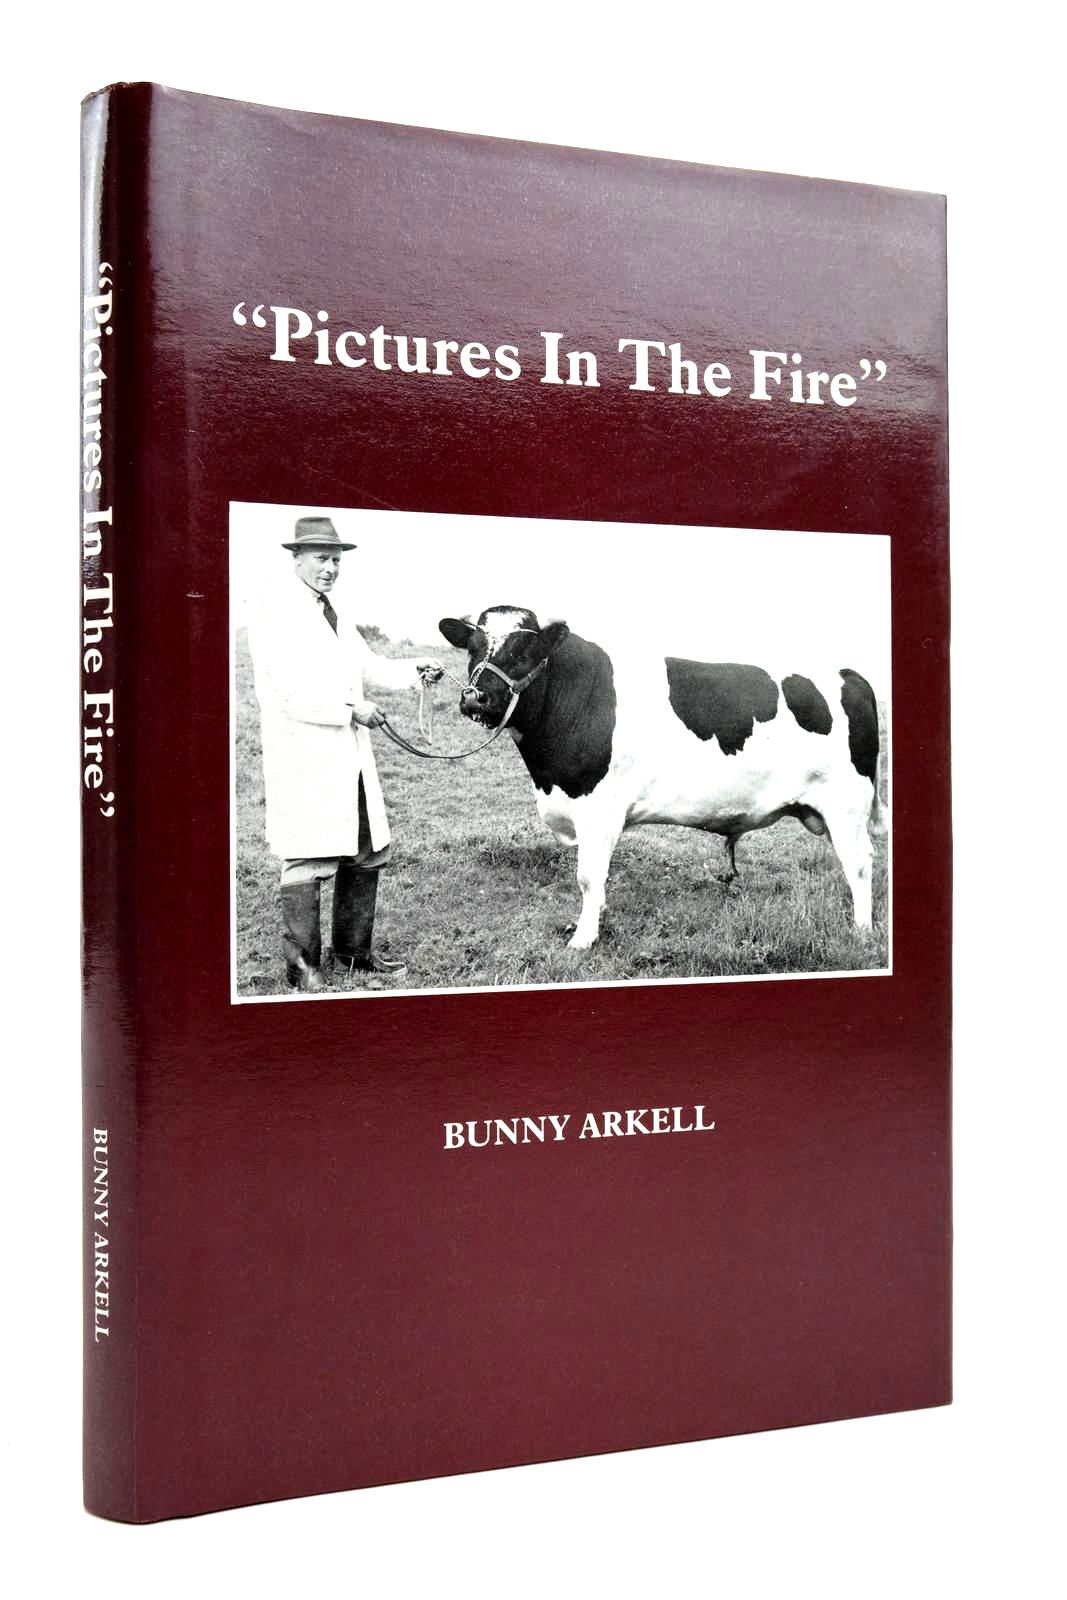 Photo of PICTURES IN THE FIRE written by Arkell, Bunny published by B.A. Hathaway Printers (STOCK CODE: 2135849)  for sale by Stella & Rose's Books